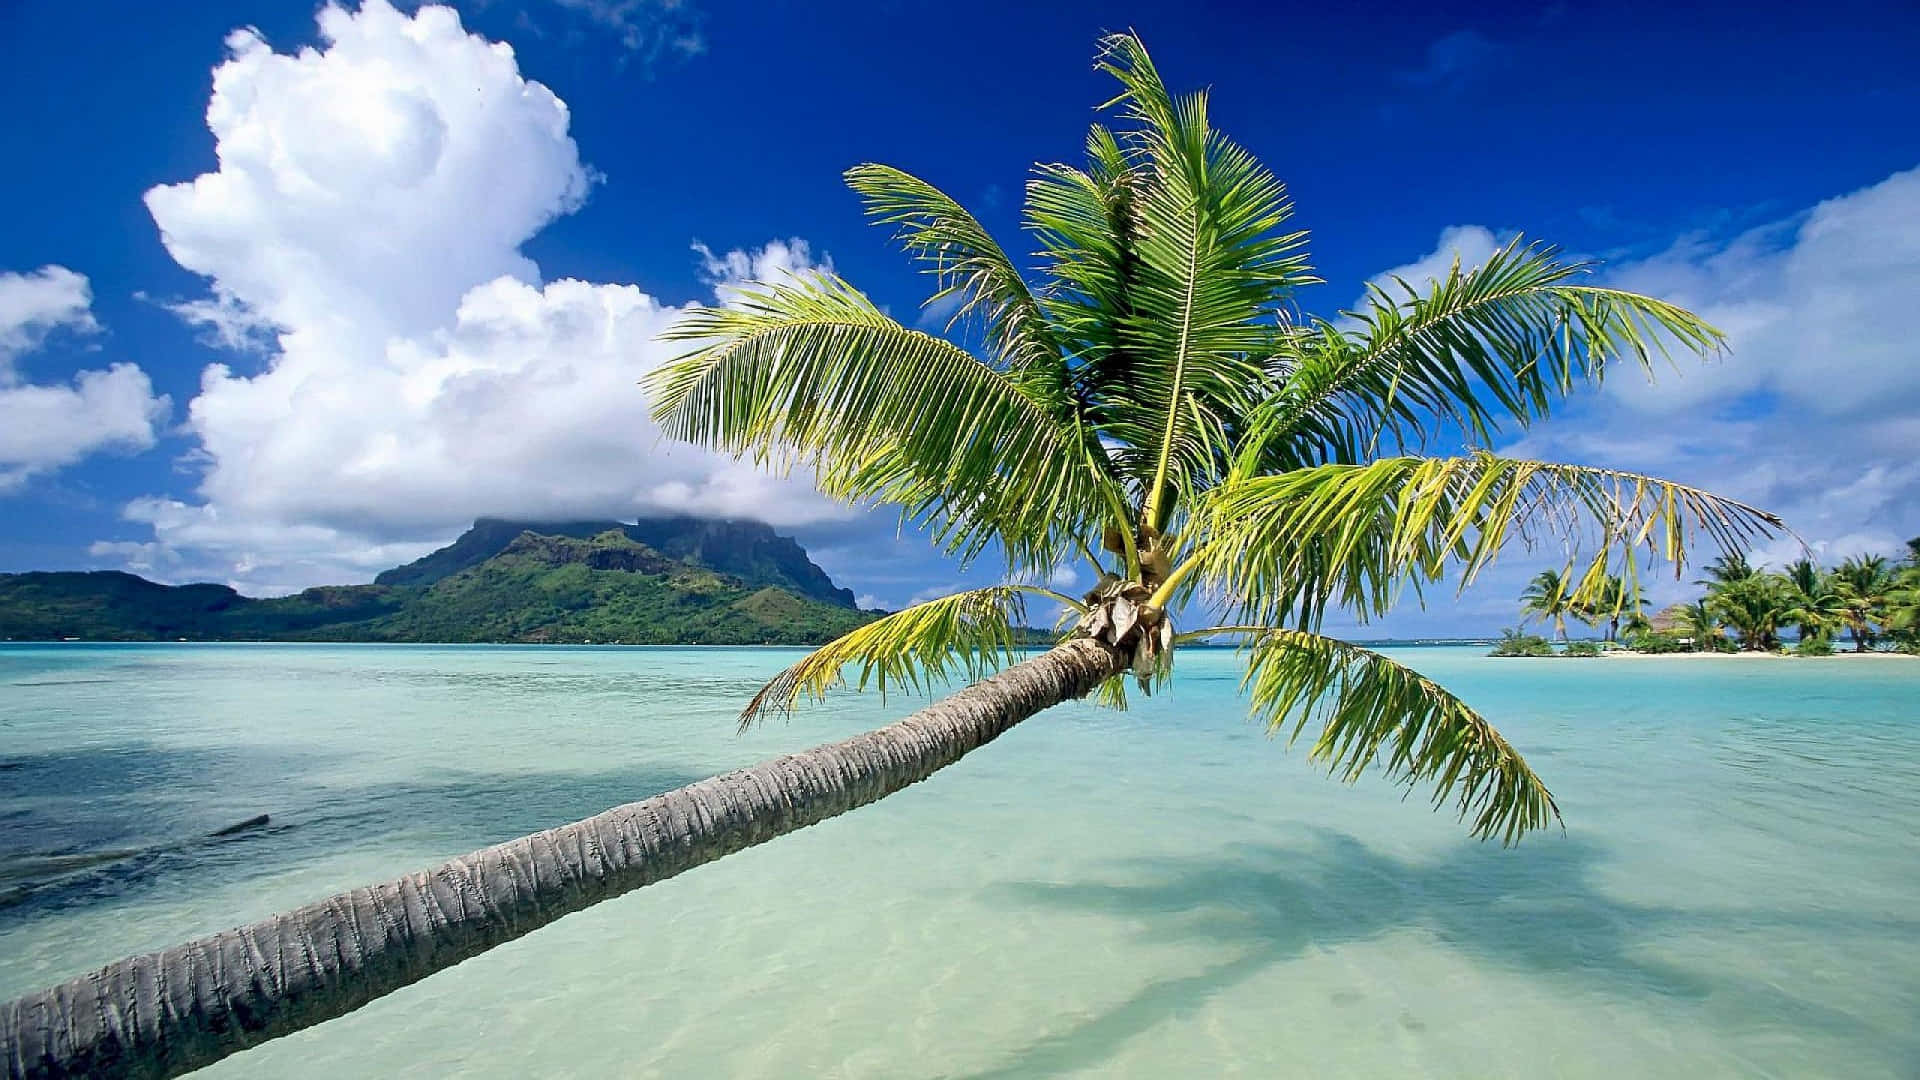 A Palm Tree Is Leaning Over The Water